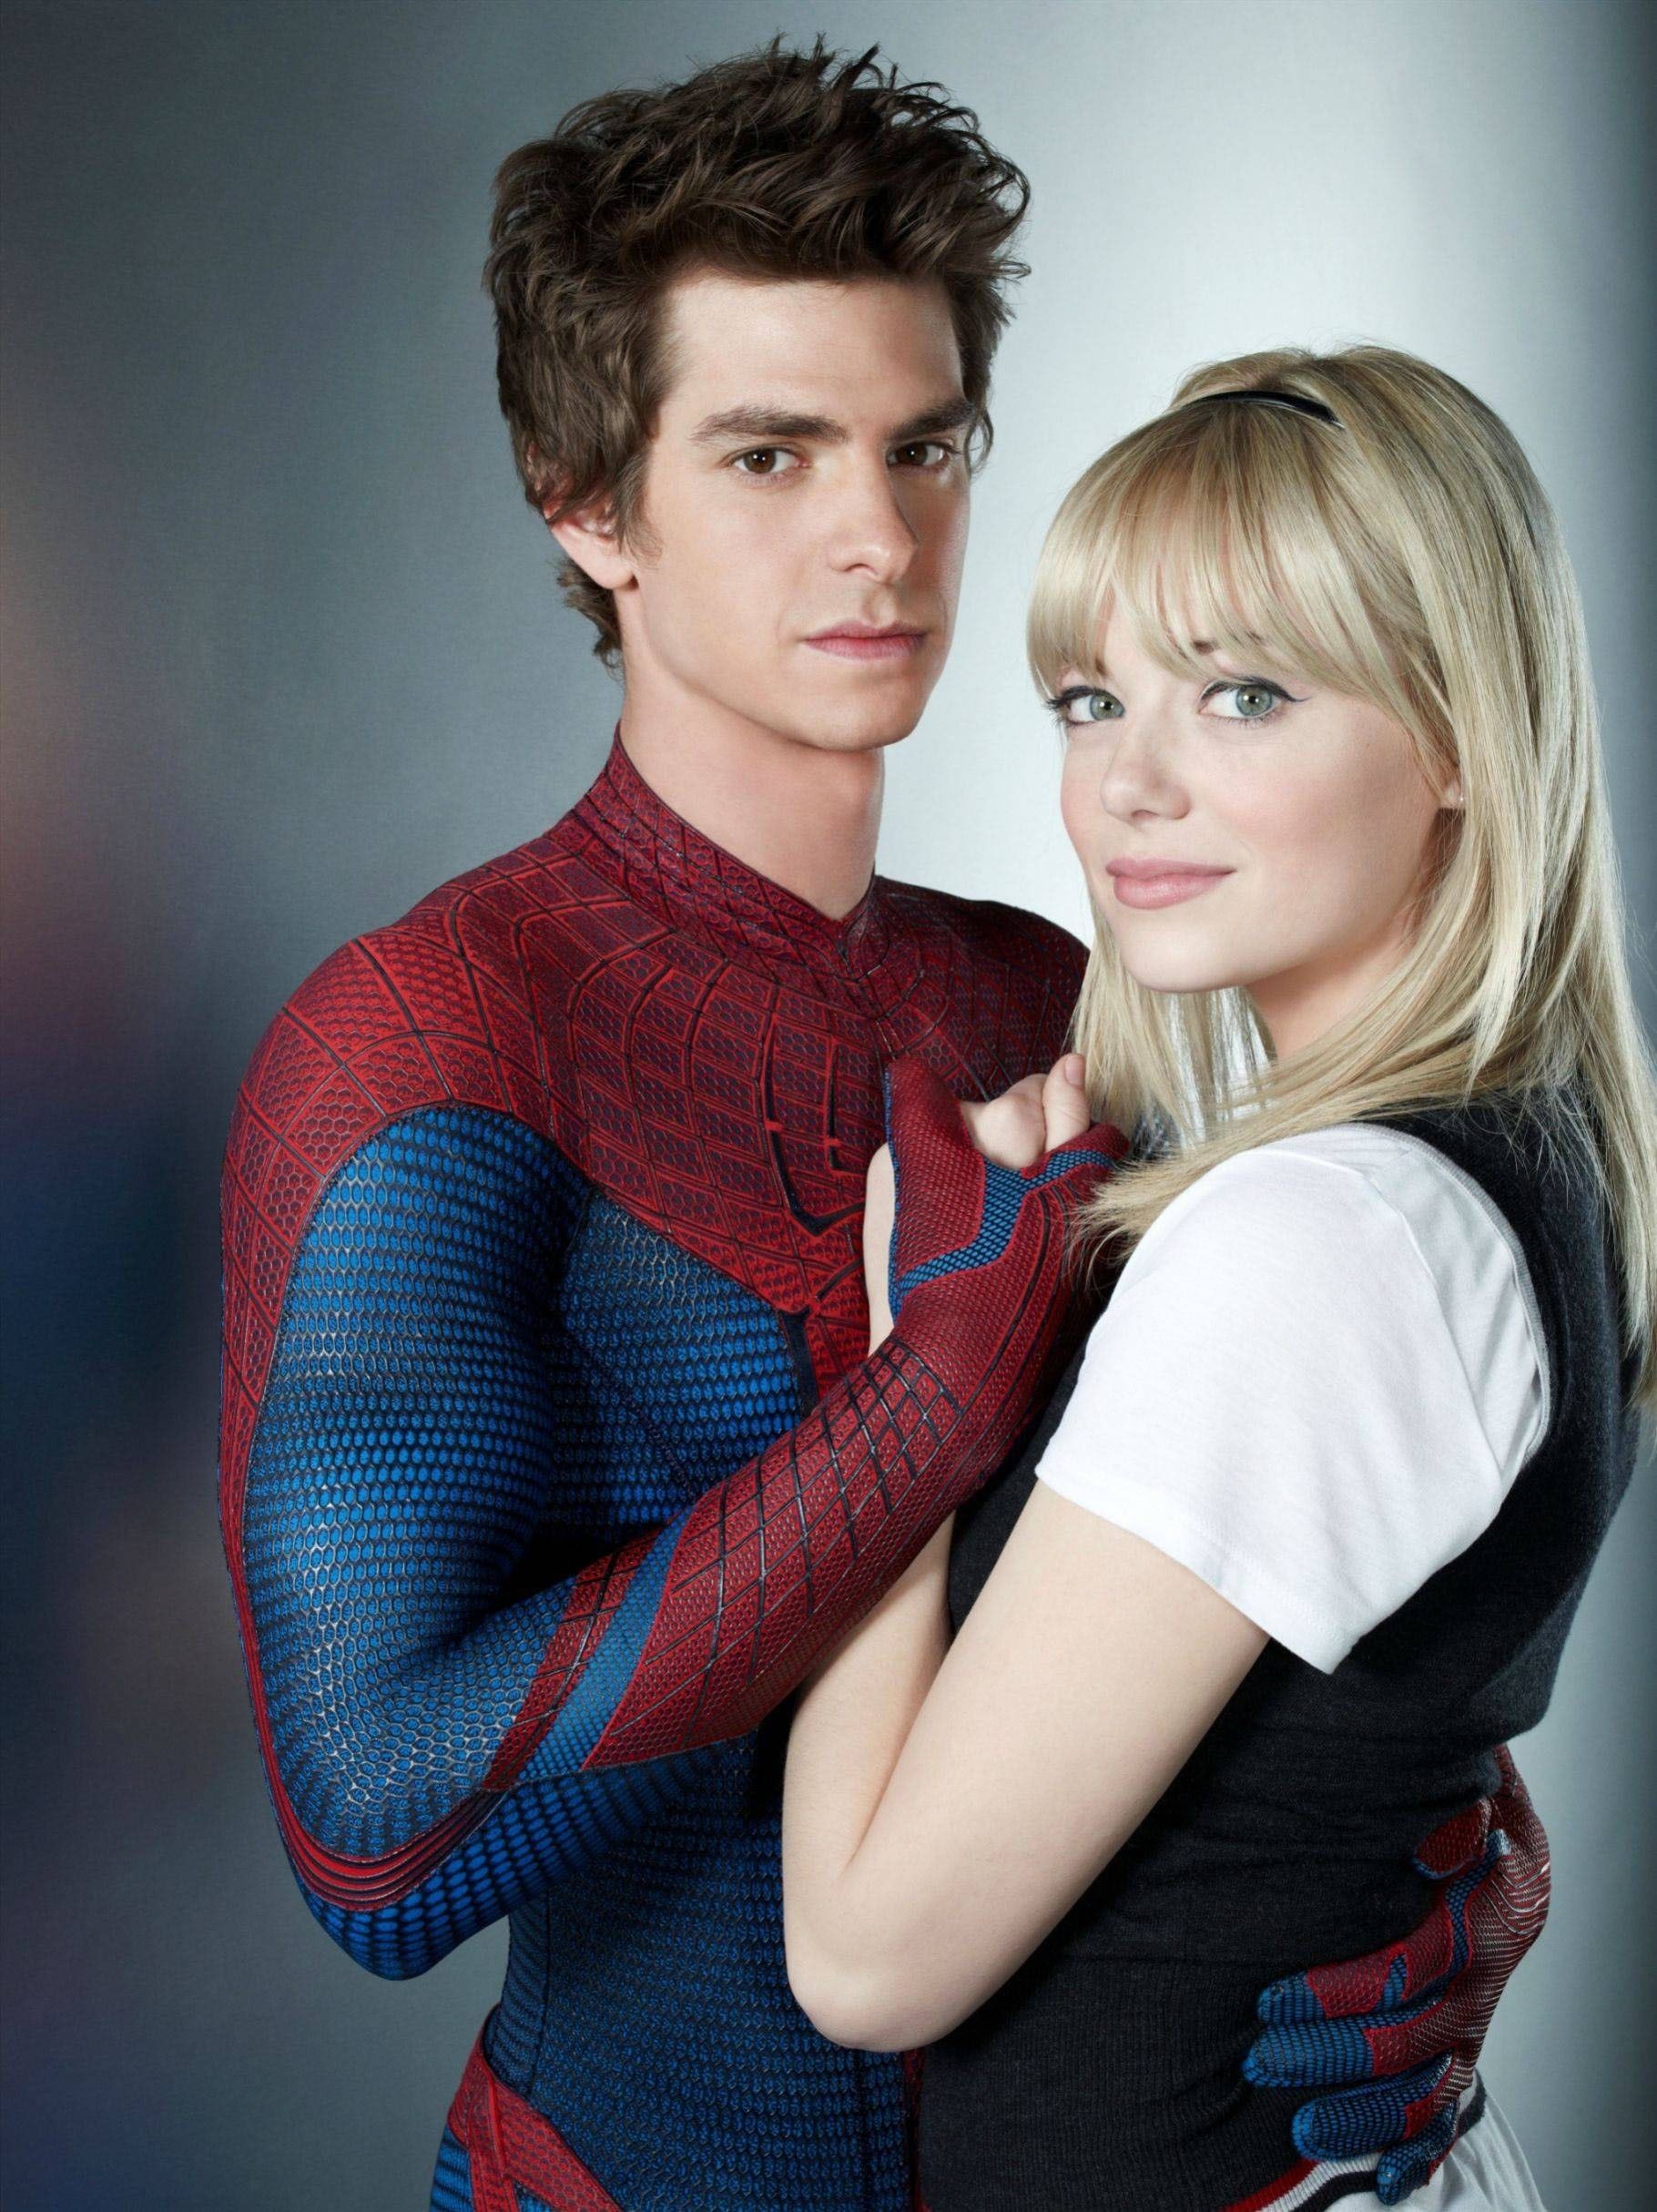 emma stone peter parker gwen stacy andrew garfield the amazing spiderman bangs movie stills 1820 High Quality Wallpaper, High Definition Wallpaper